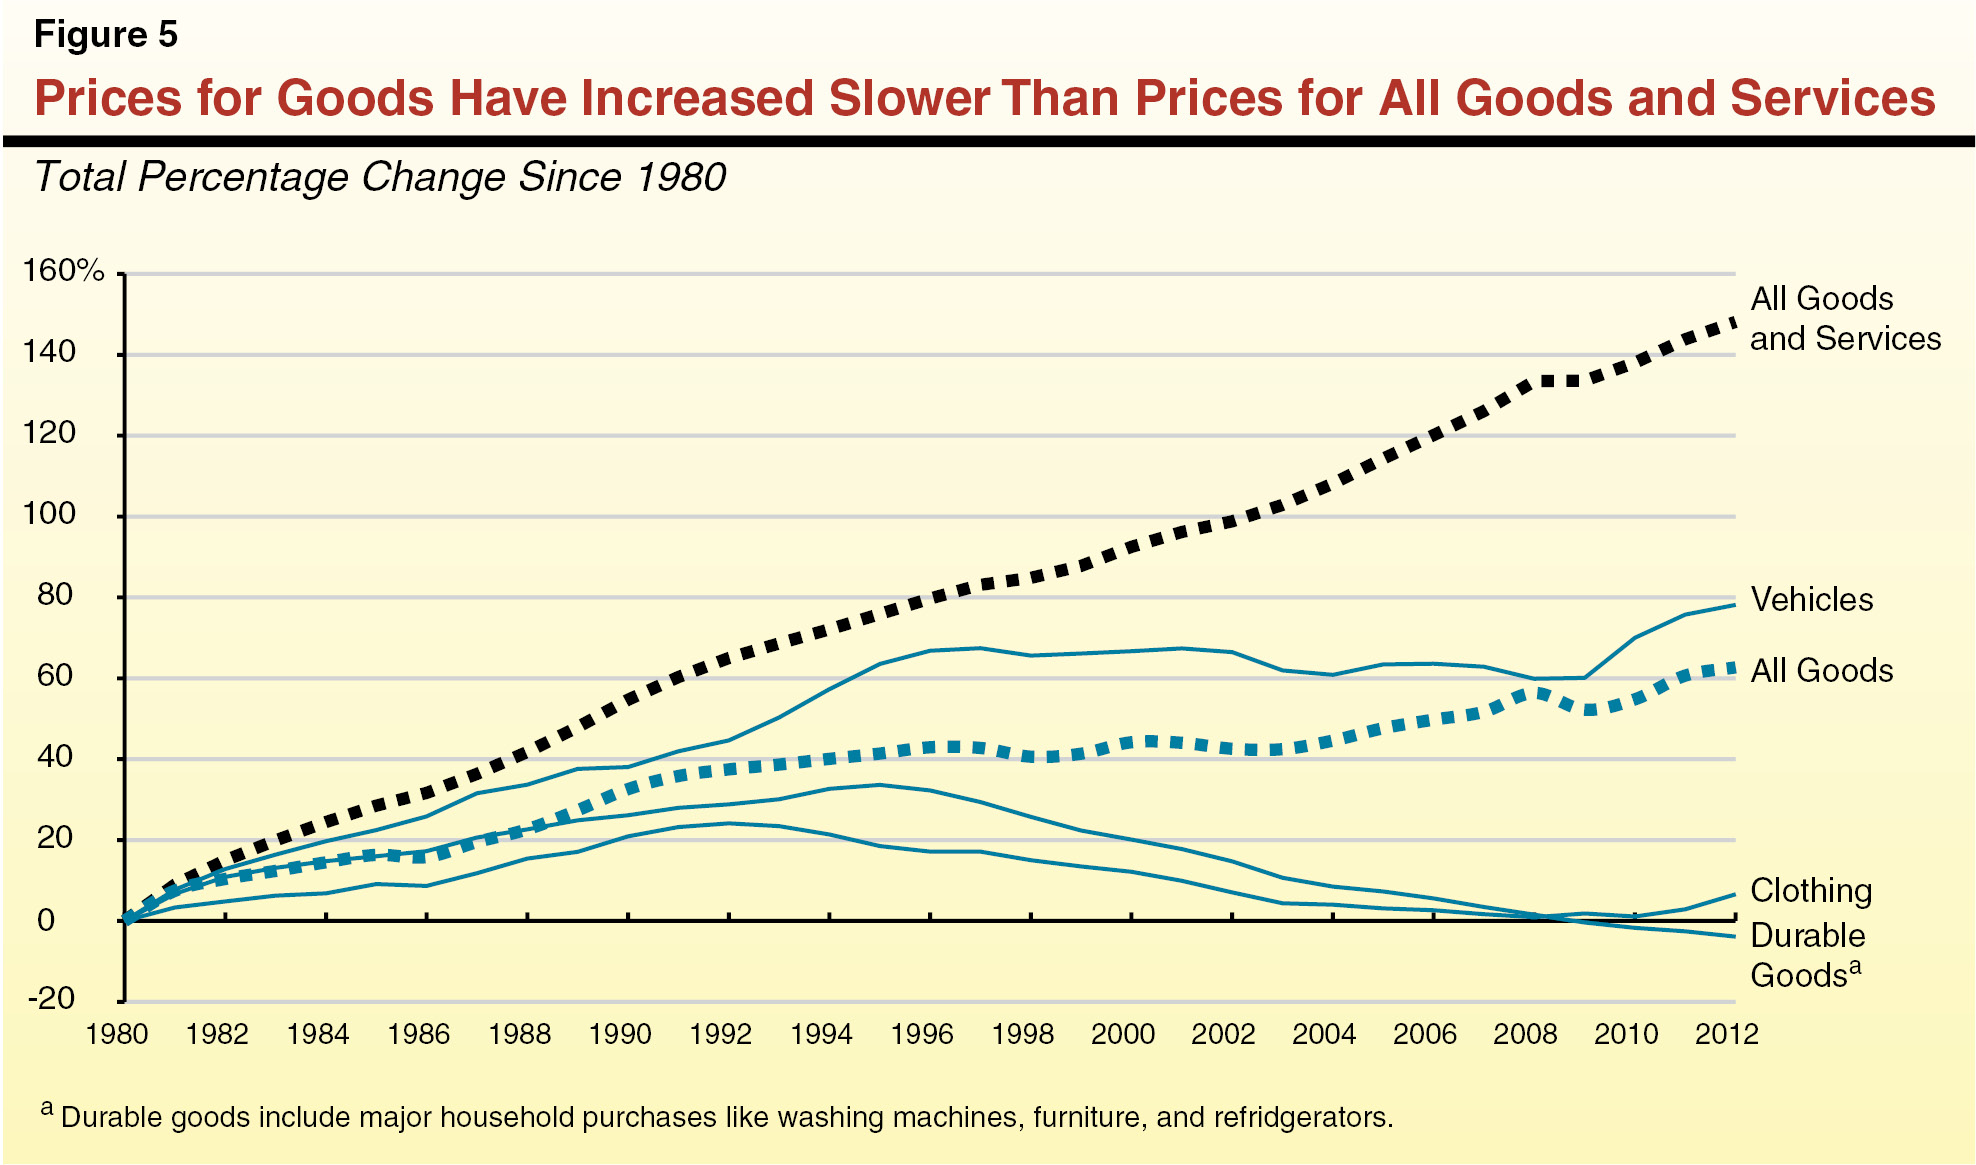 Prices for goods have increased slower than prices for all goods and services